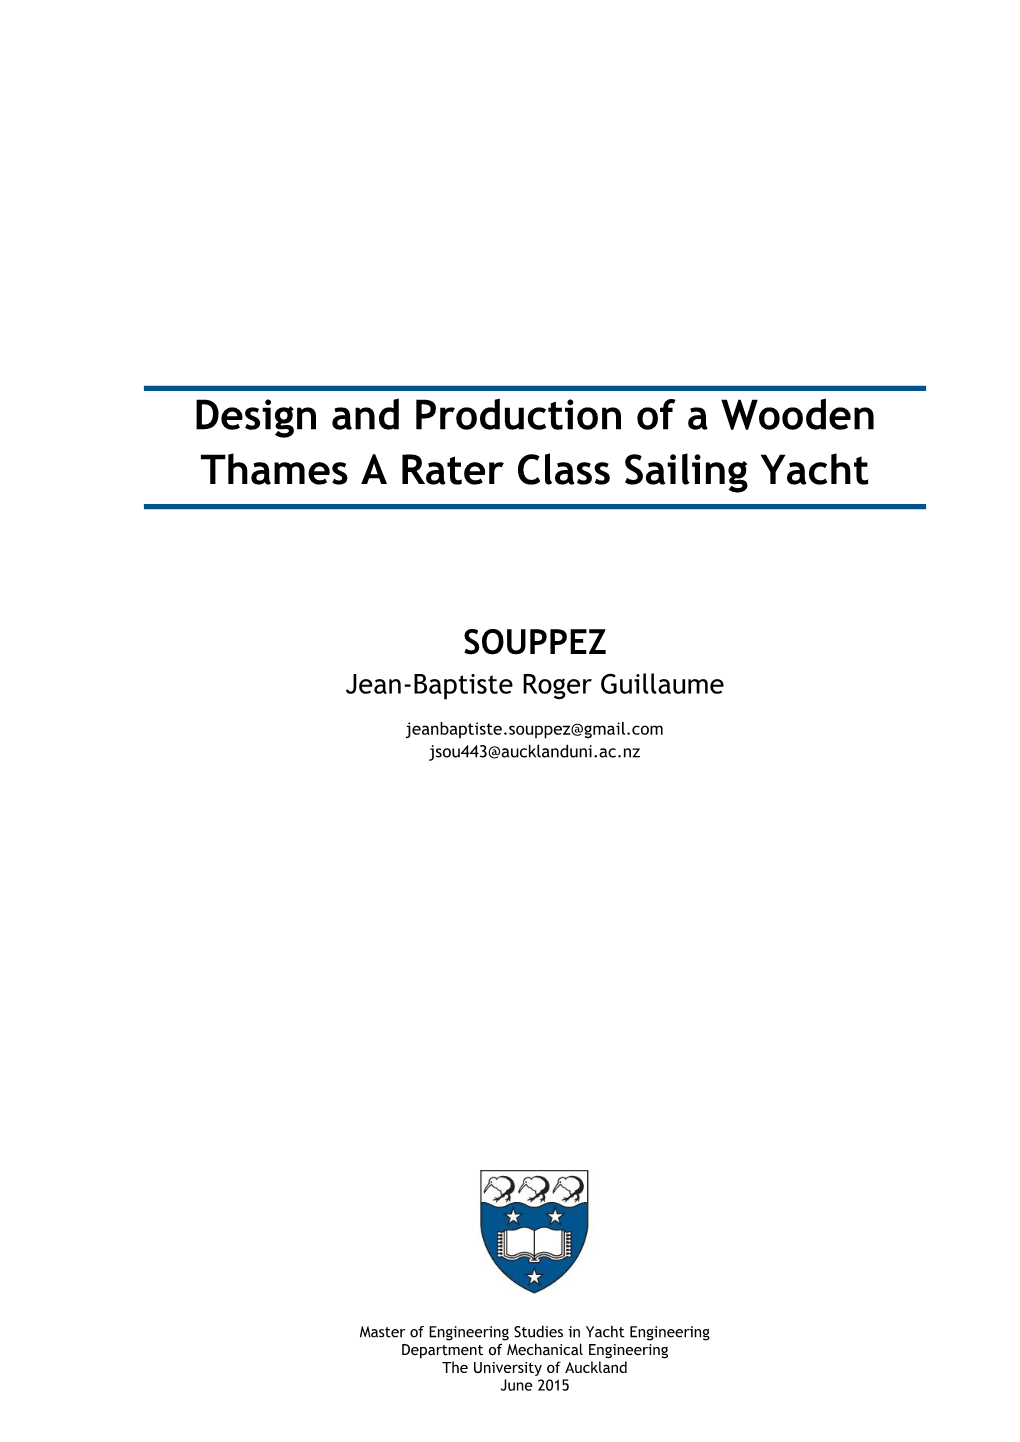 Design and Production of a Wooden Thames a Rater Class Sailing Yacht